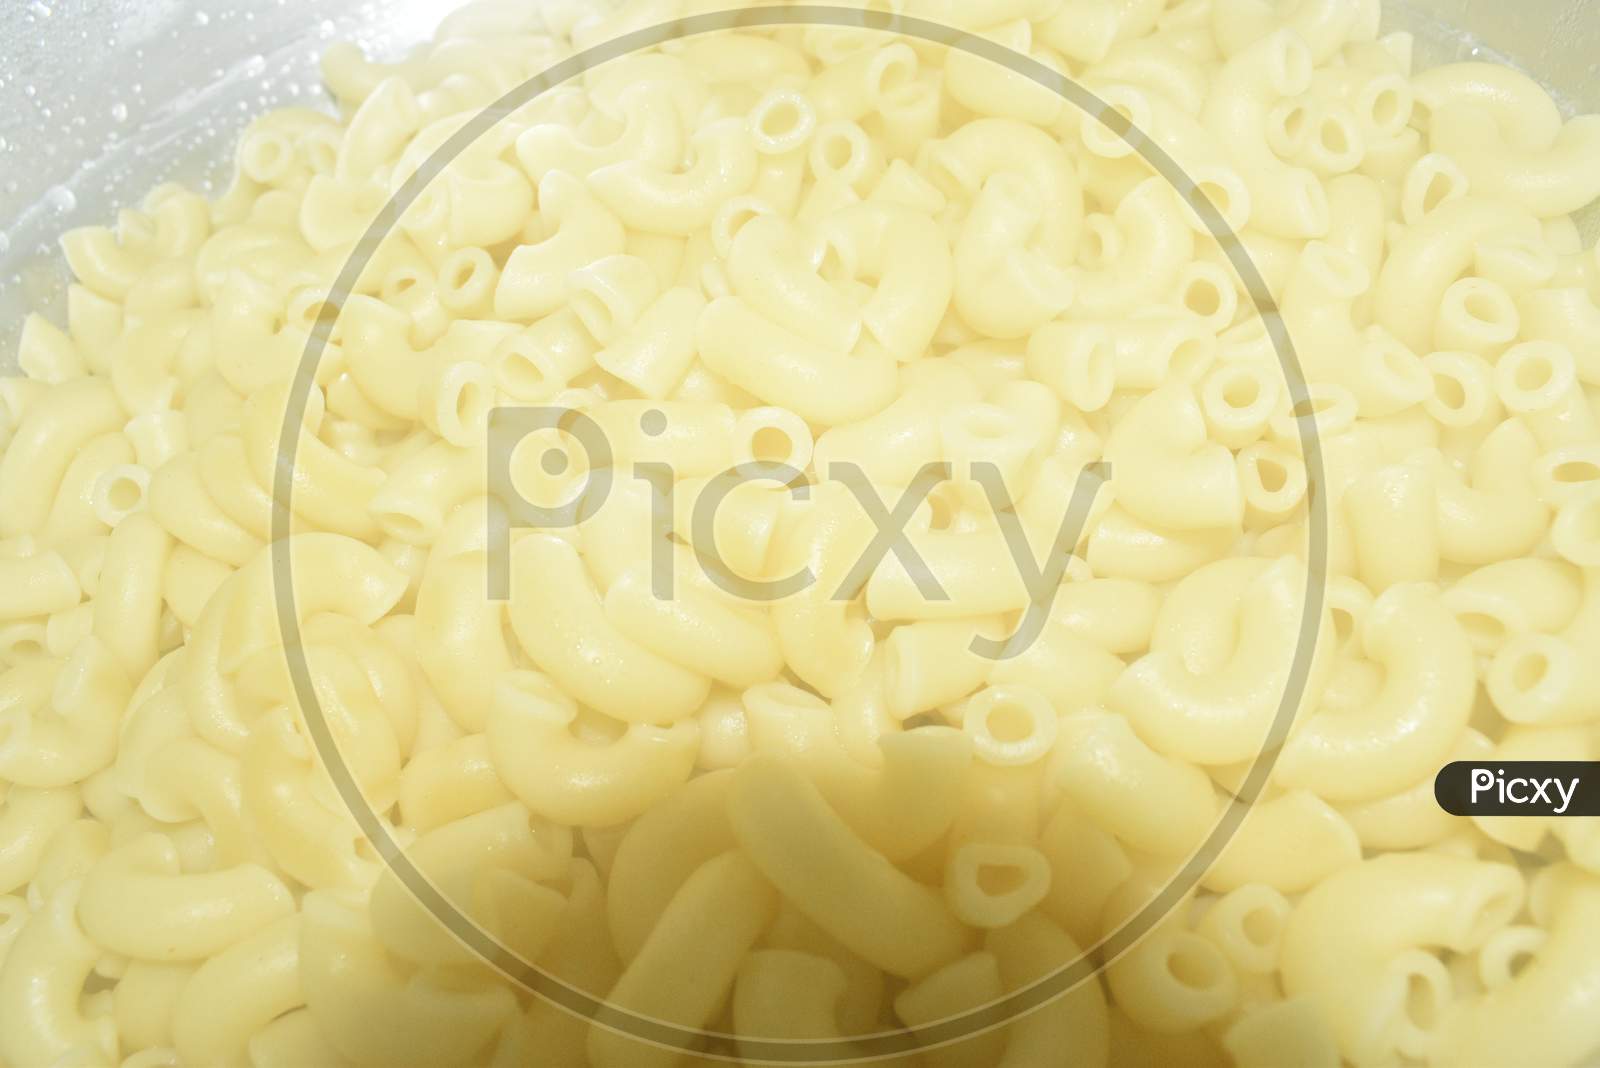 Boiled Pasta, Cooked Without Anything, Pasta Background, Food For Children. Fusilli, Rigate.